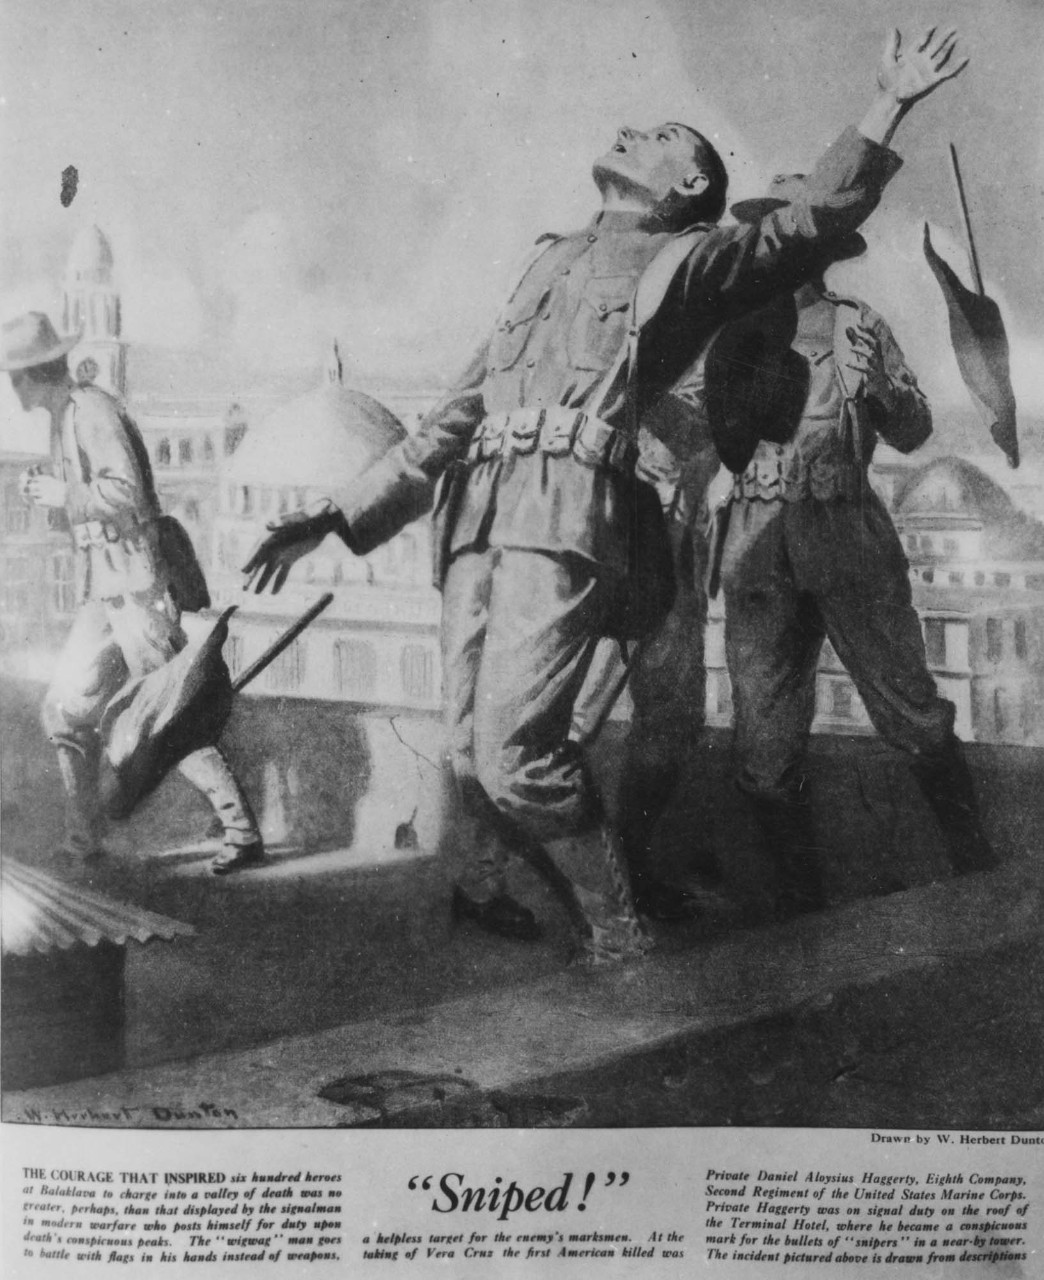 Drawing of a marine falling backward on a rooftop and dropping his signal flags.